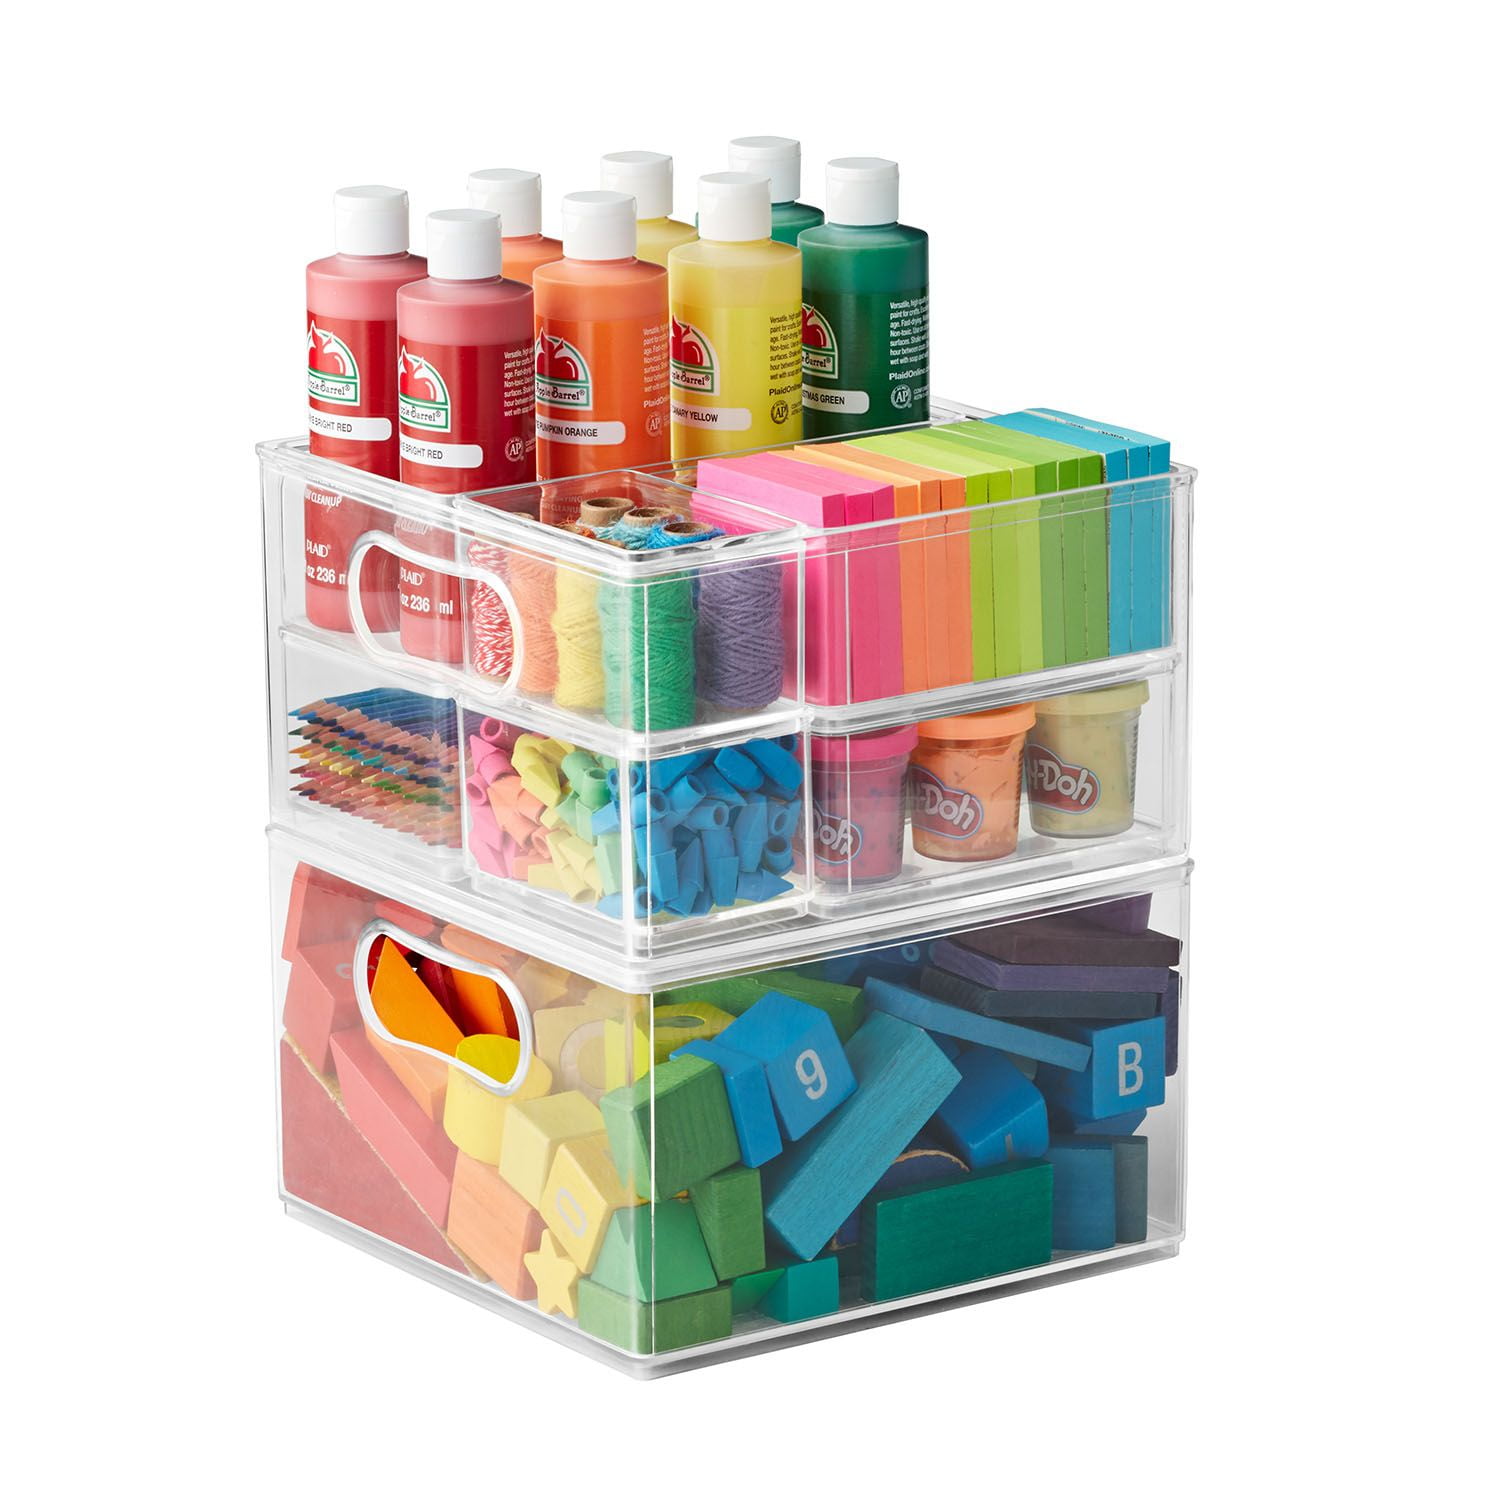 The Home Edit 10 Piece Laundry Edit, Clear Plastic Modular Storage System